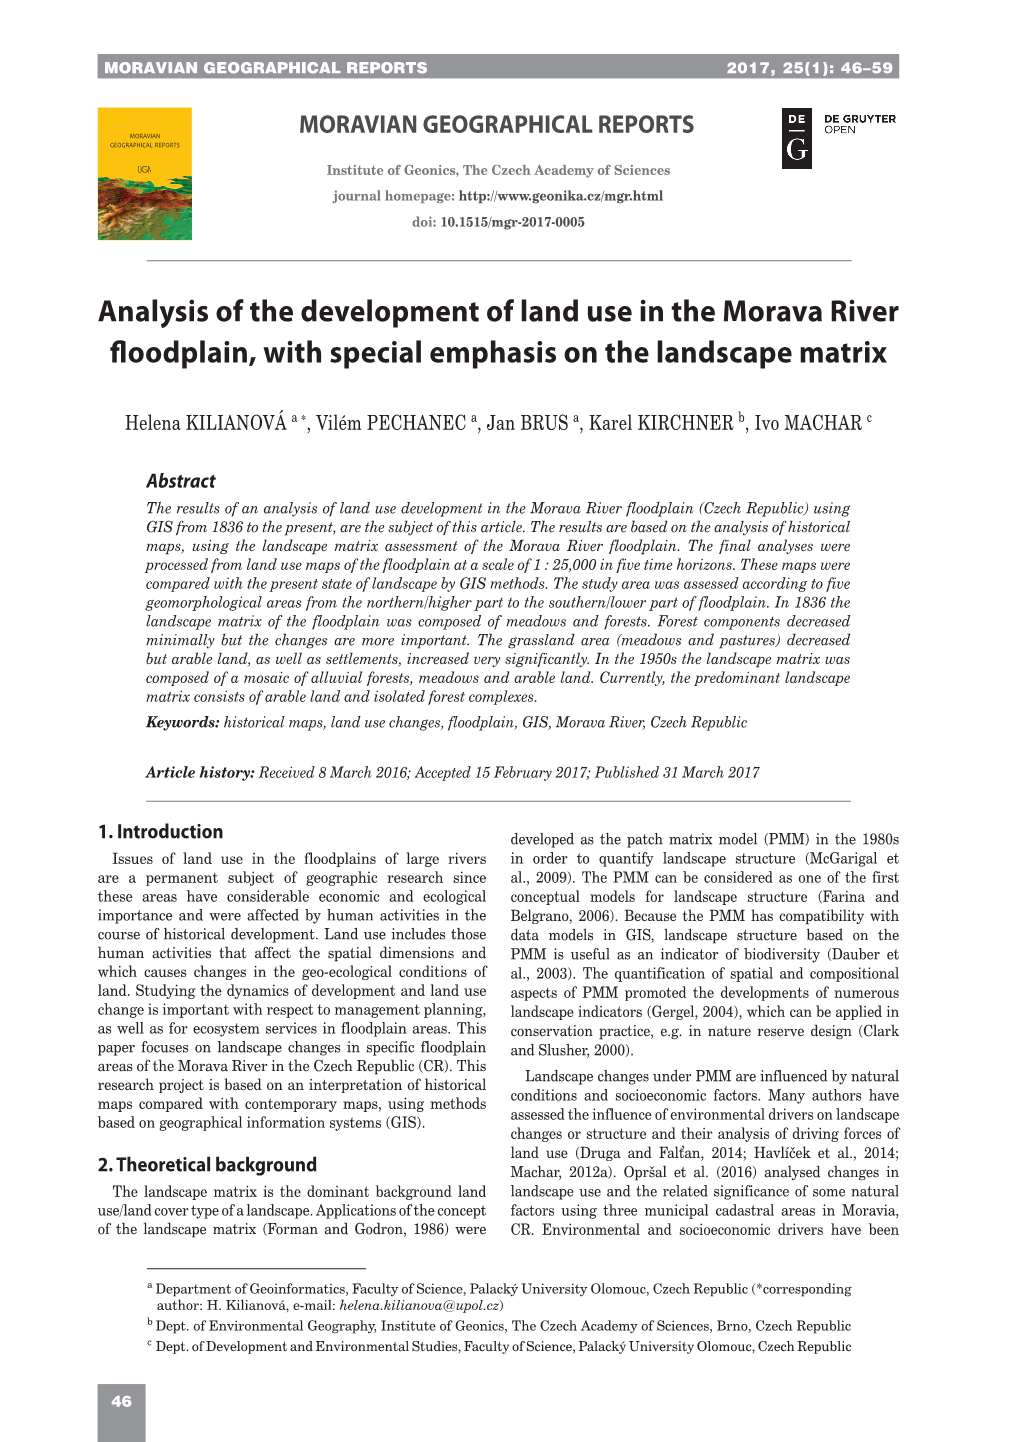 Analysis of the Development of Land Use in the Morava River Floodplain, with Special Emphasis on the Landscape Matrix